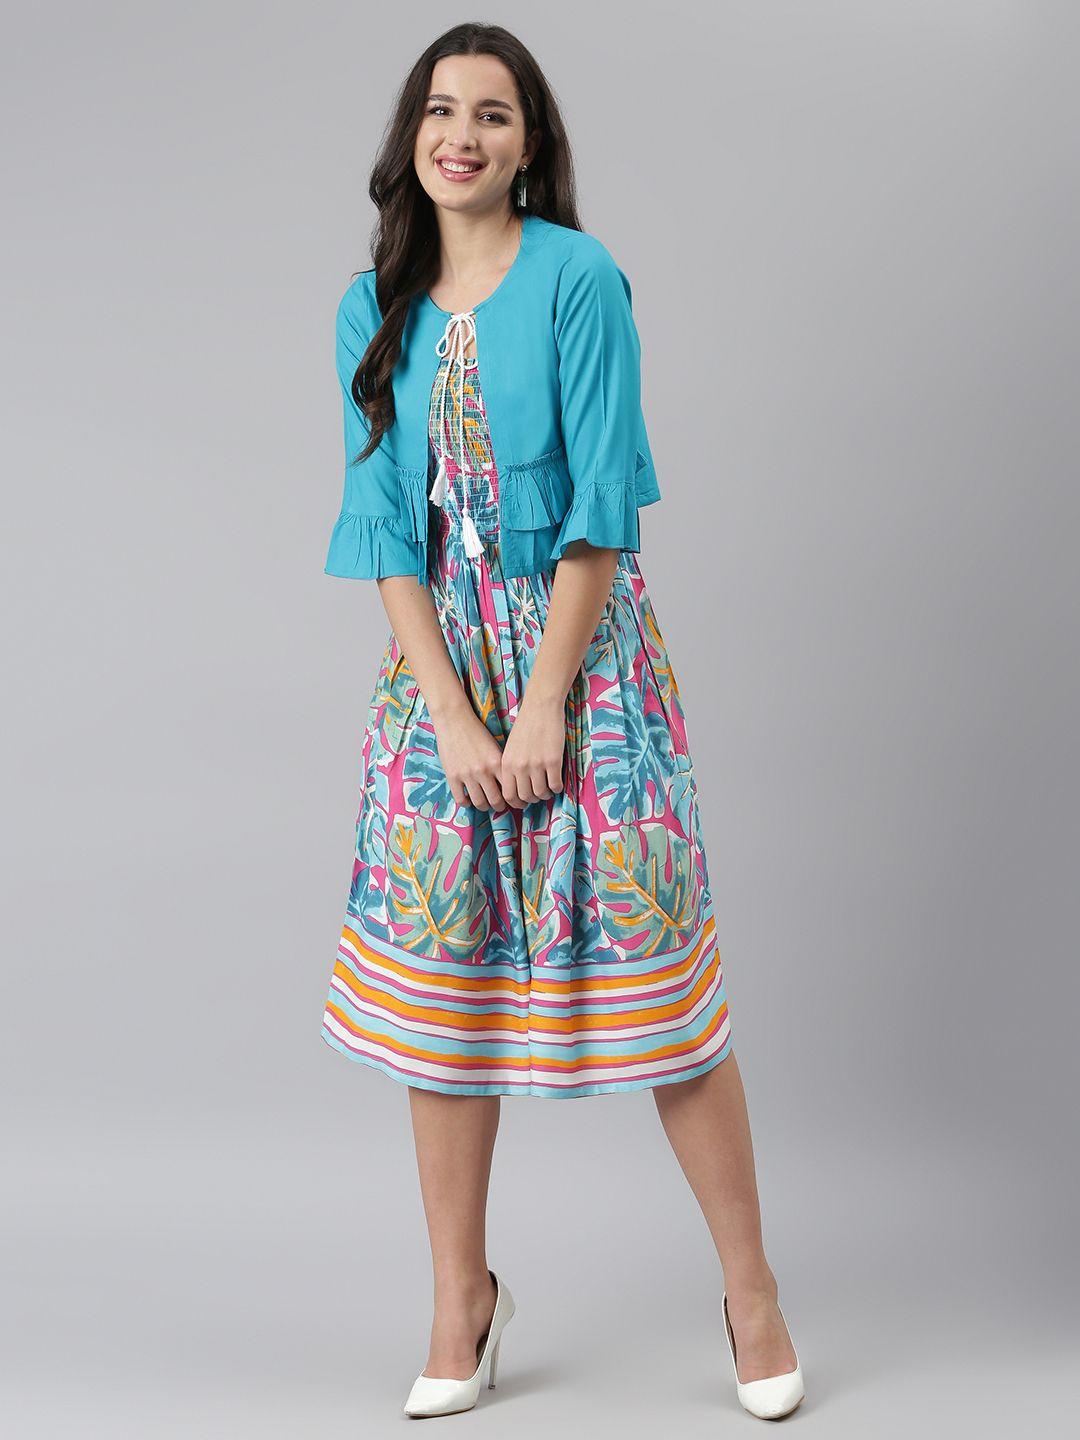 deebaco-turquoise-blue-tropical-printed-smocked-fit-&-flare-dress-with-shrug